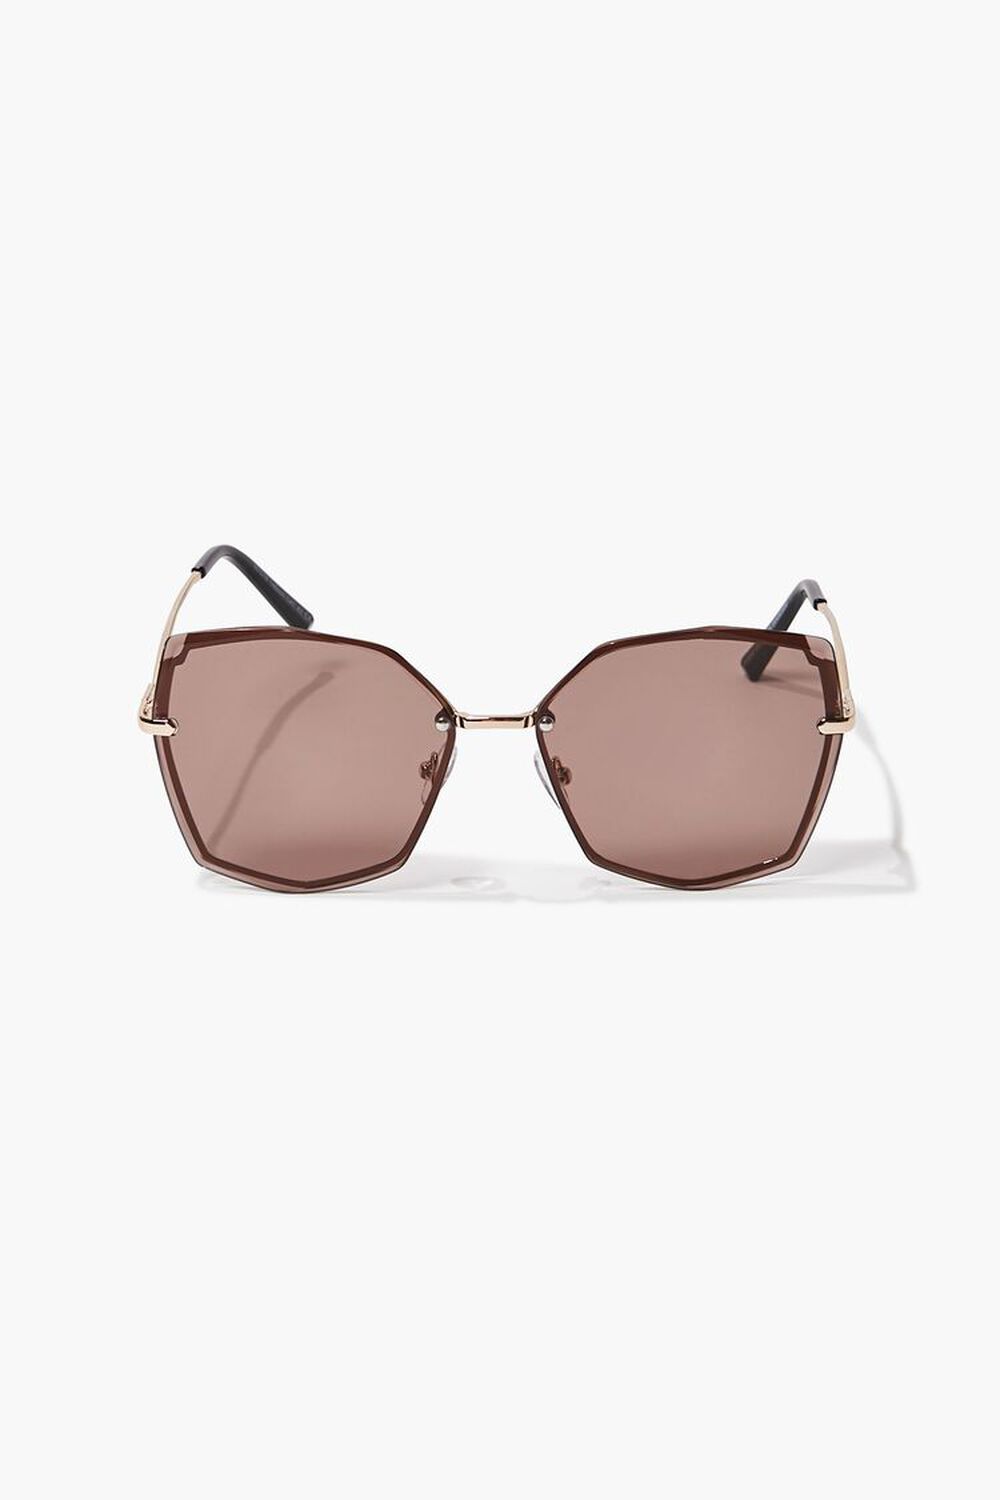 GOLD/BROWN Geo Novelty Sunglasses, image 1